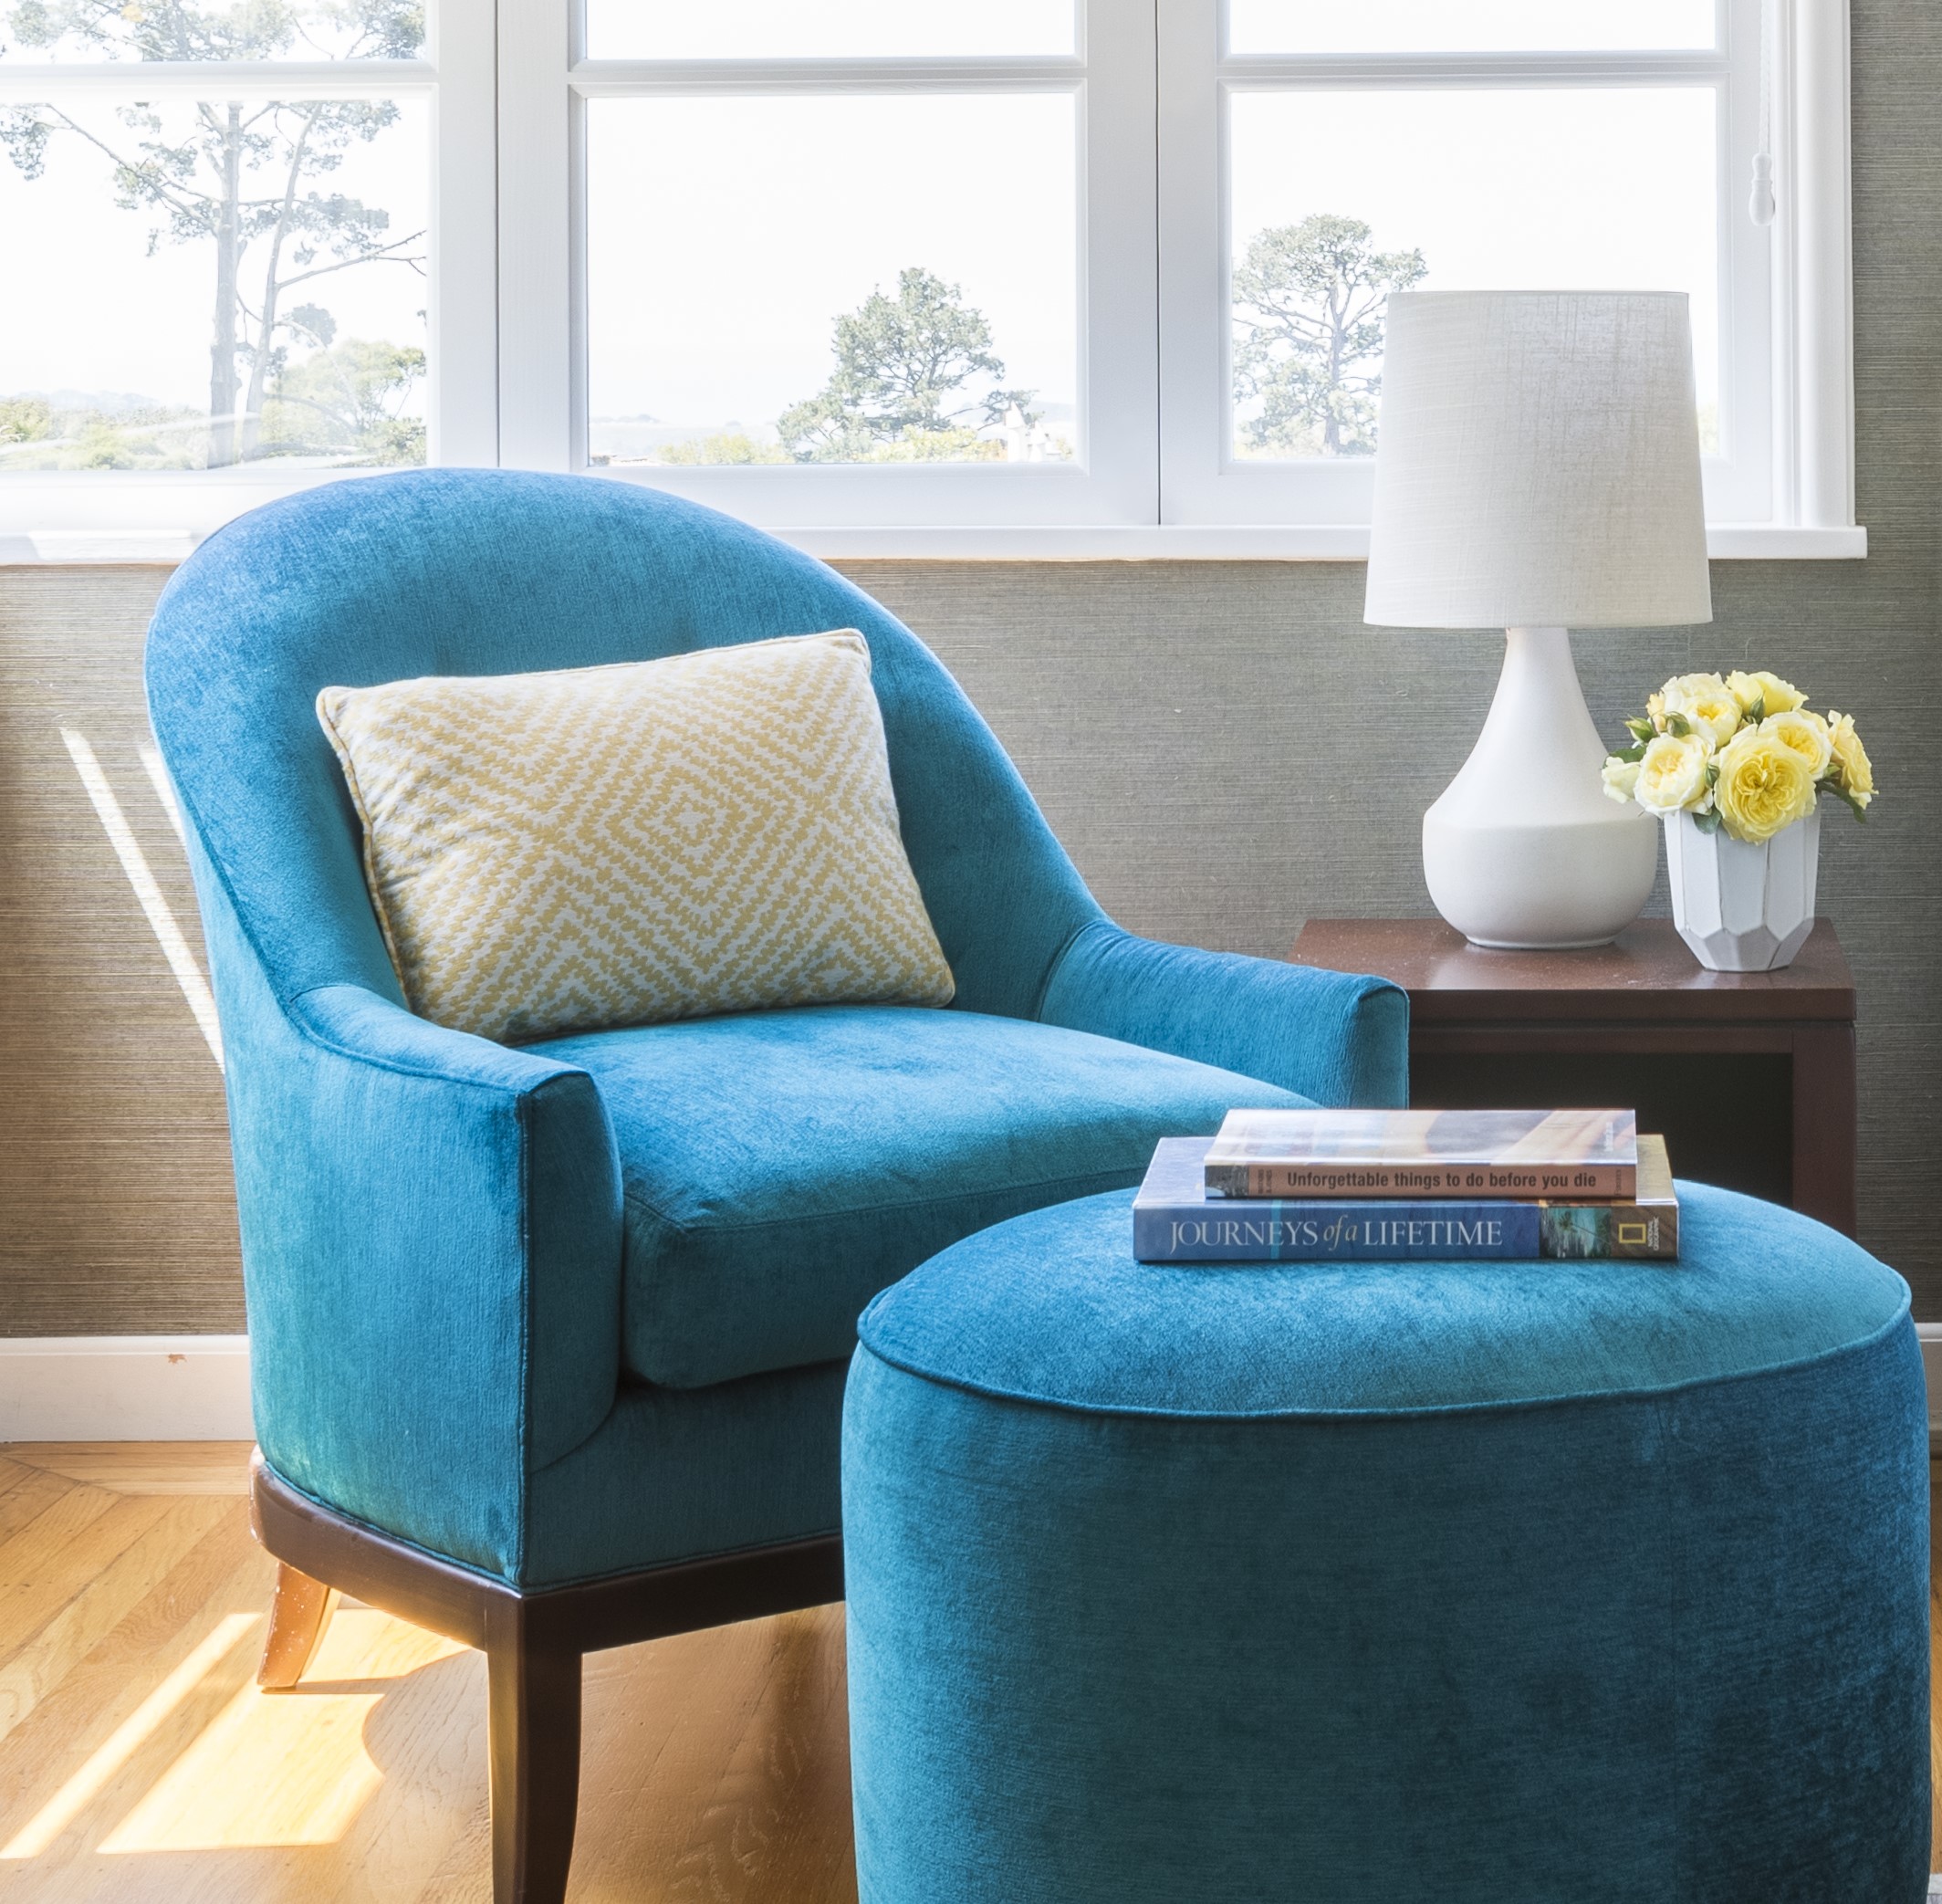 Blue lounge chair with yellow patterned accent pillow and matching ottoman